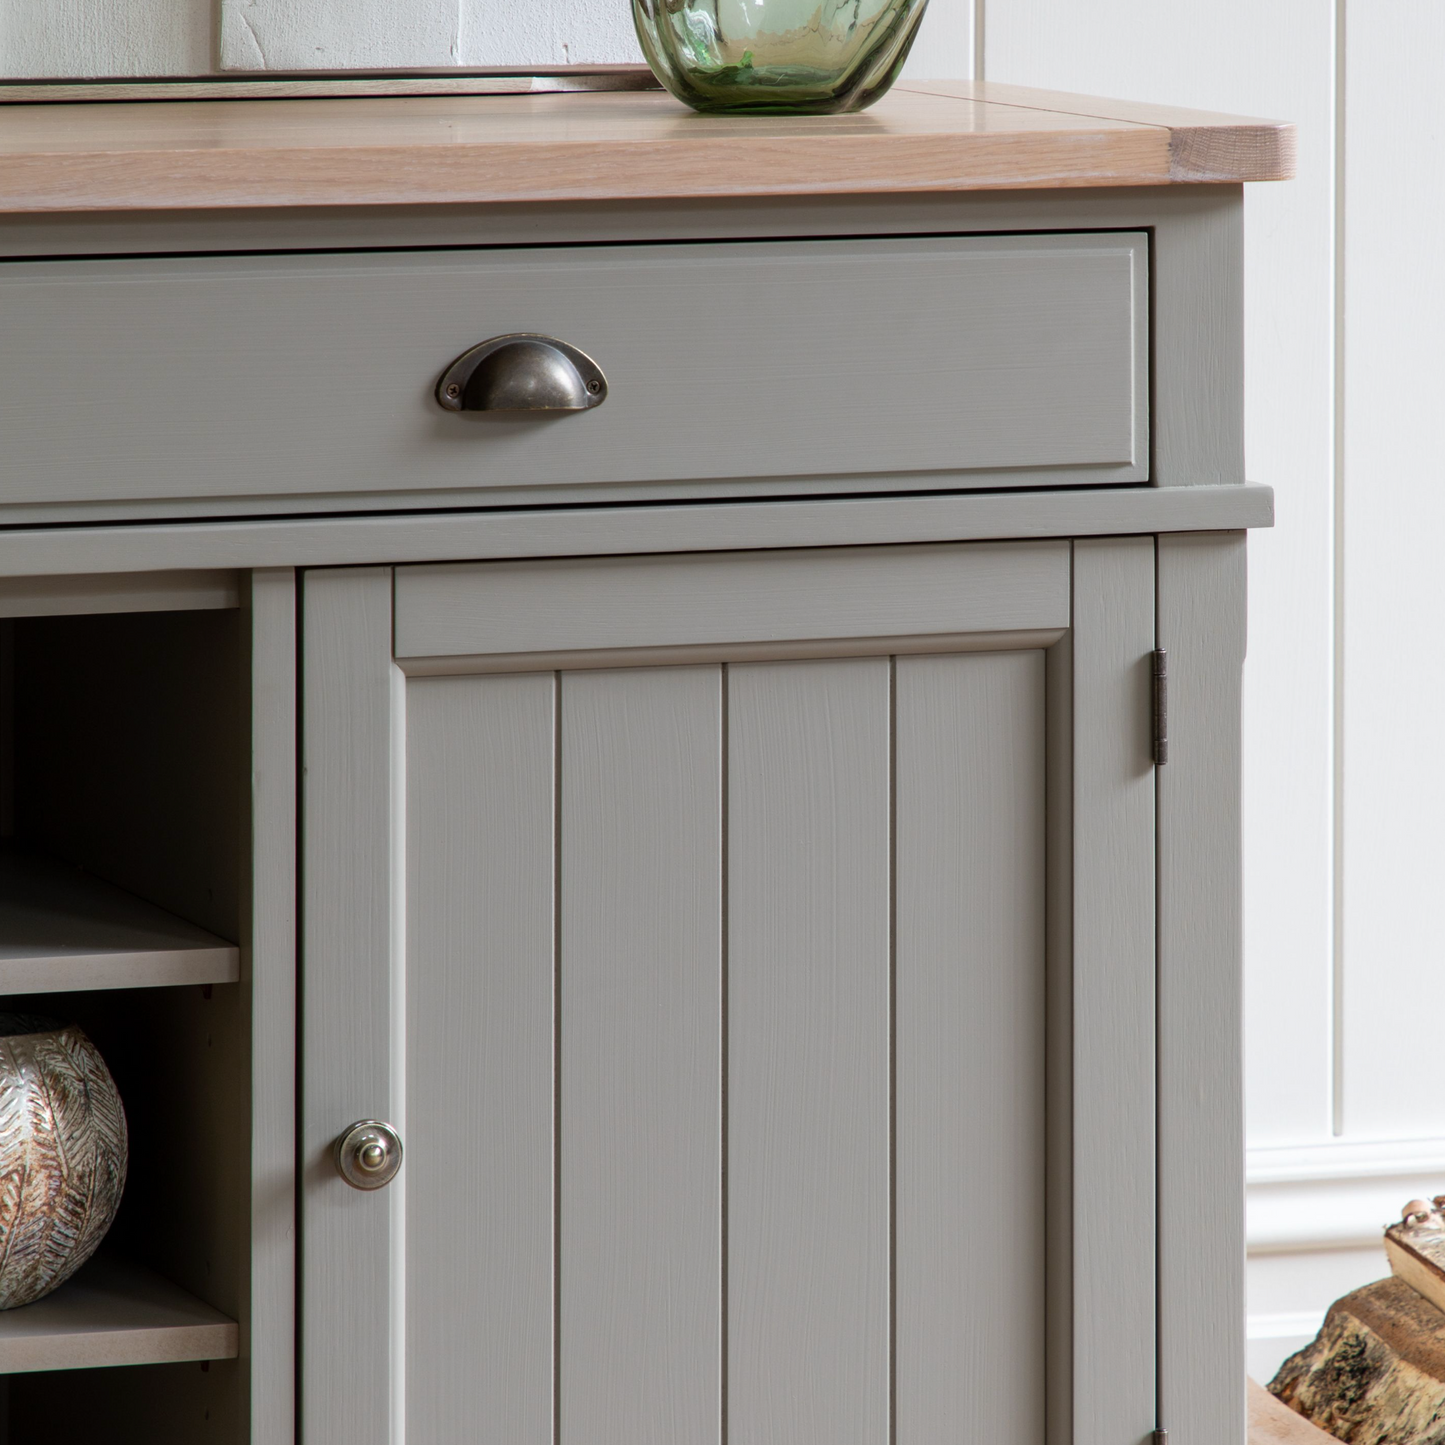 A Prairie sideboard from Kikiathome.co.uk with a vase on top, perfect for home furniture and interior decor.